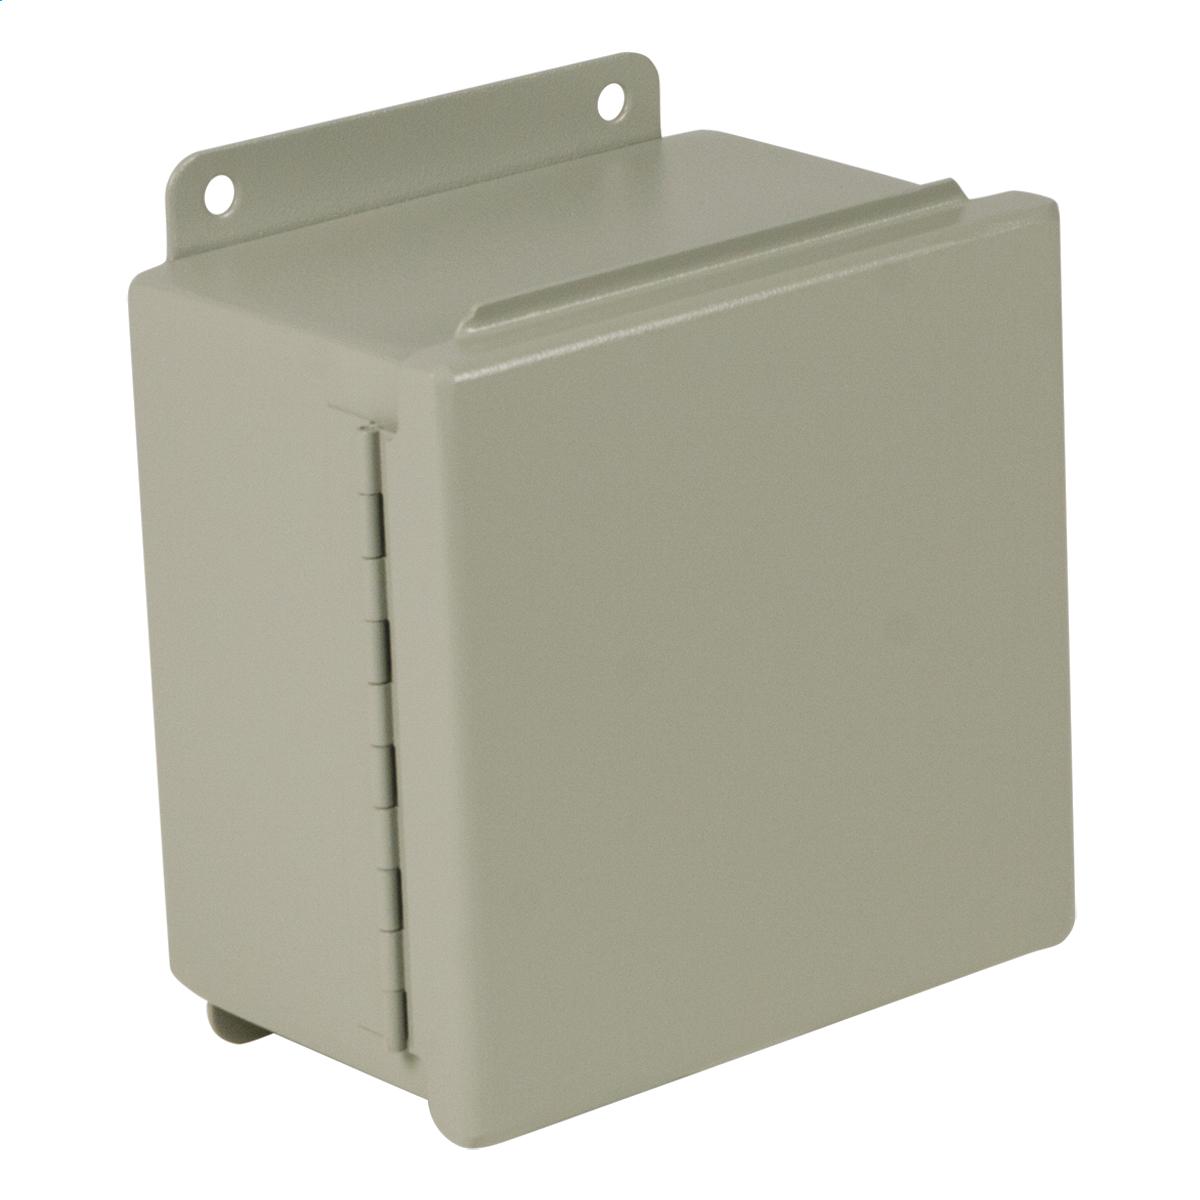 Hubbell B121005CHS N12 JIC Continuous Hinge Short Side 12X10X5 Carbon Steel - Gray  ; Bodies fabricated from 14 gauge and doors fabricated from 16 gauge steel. Continuously welded seams ground smooth, less knockouts or holes. Lids are sealed with closed cell oil resistant n